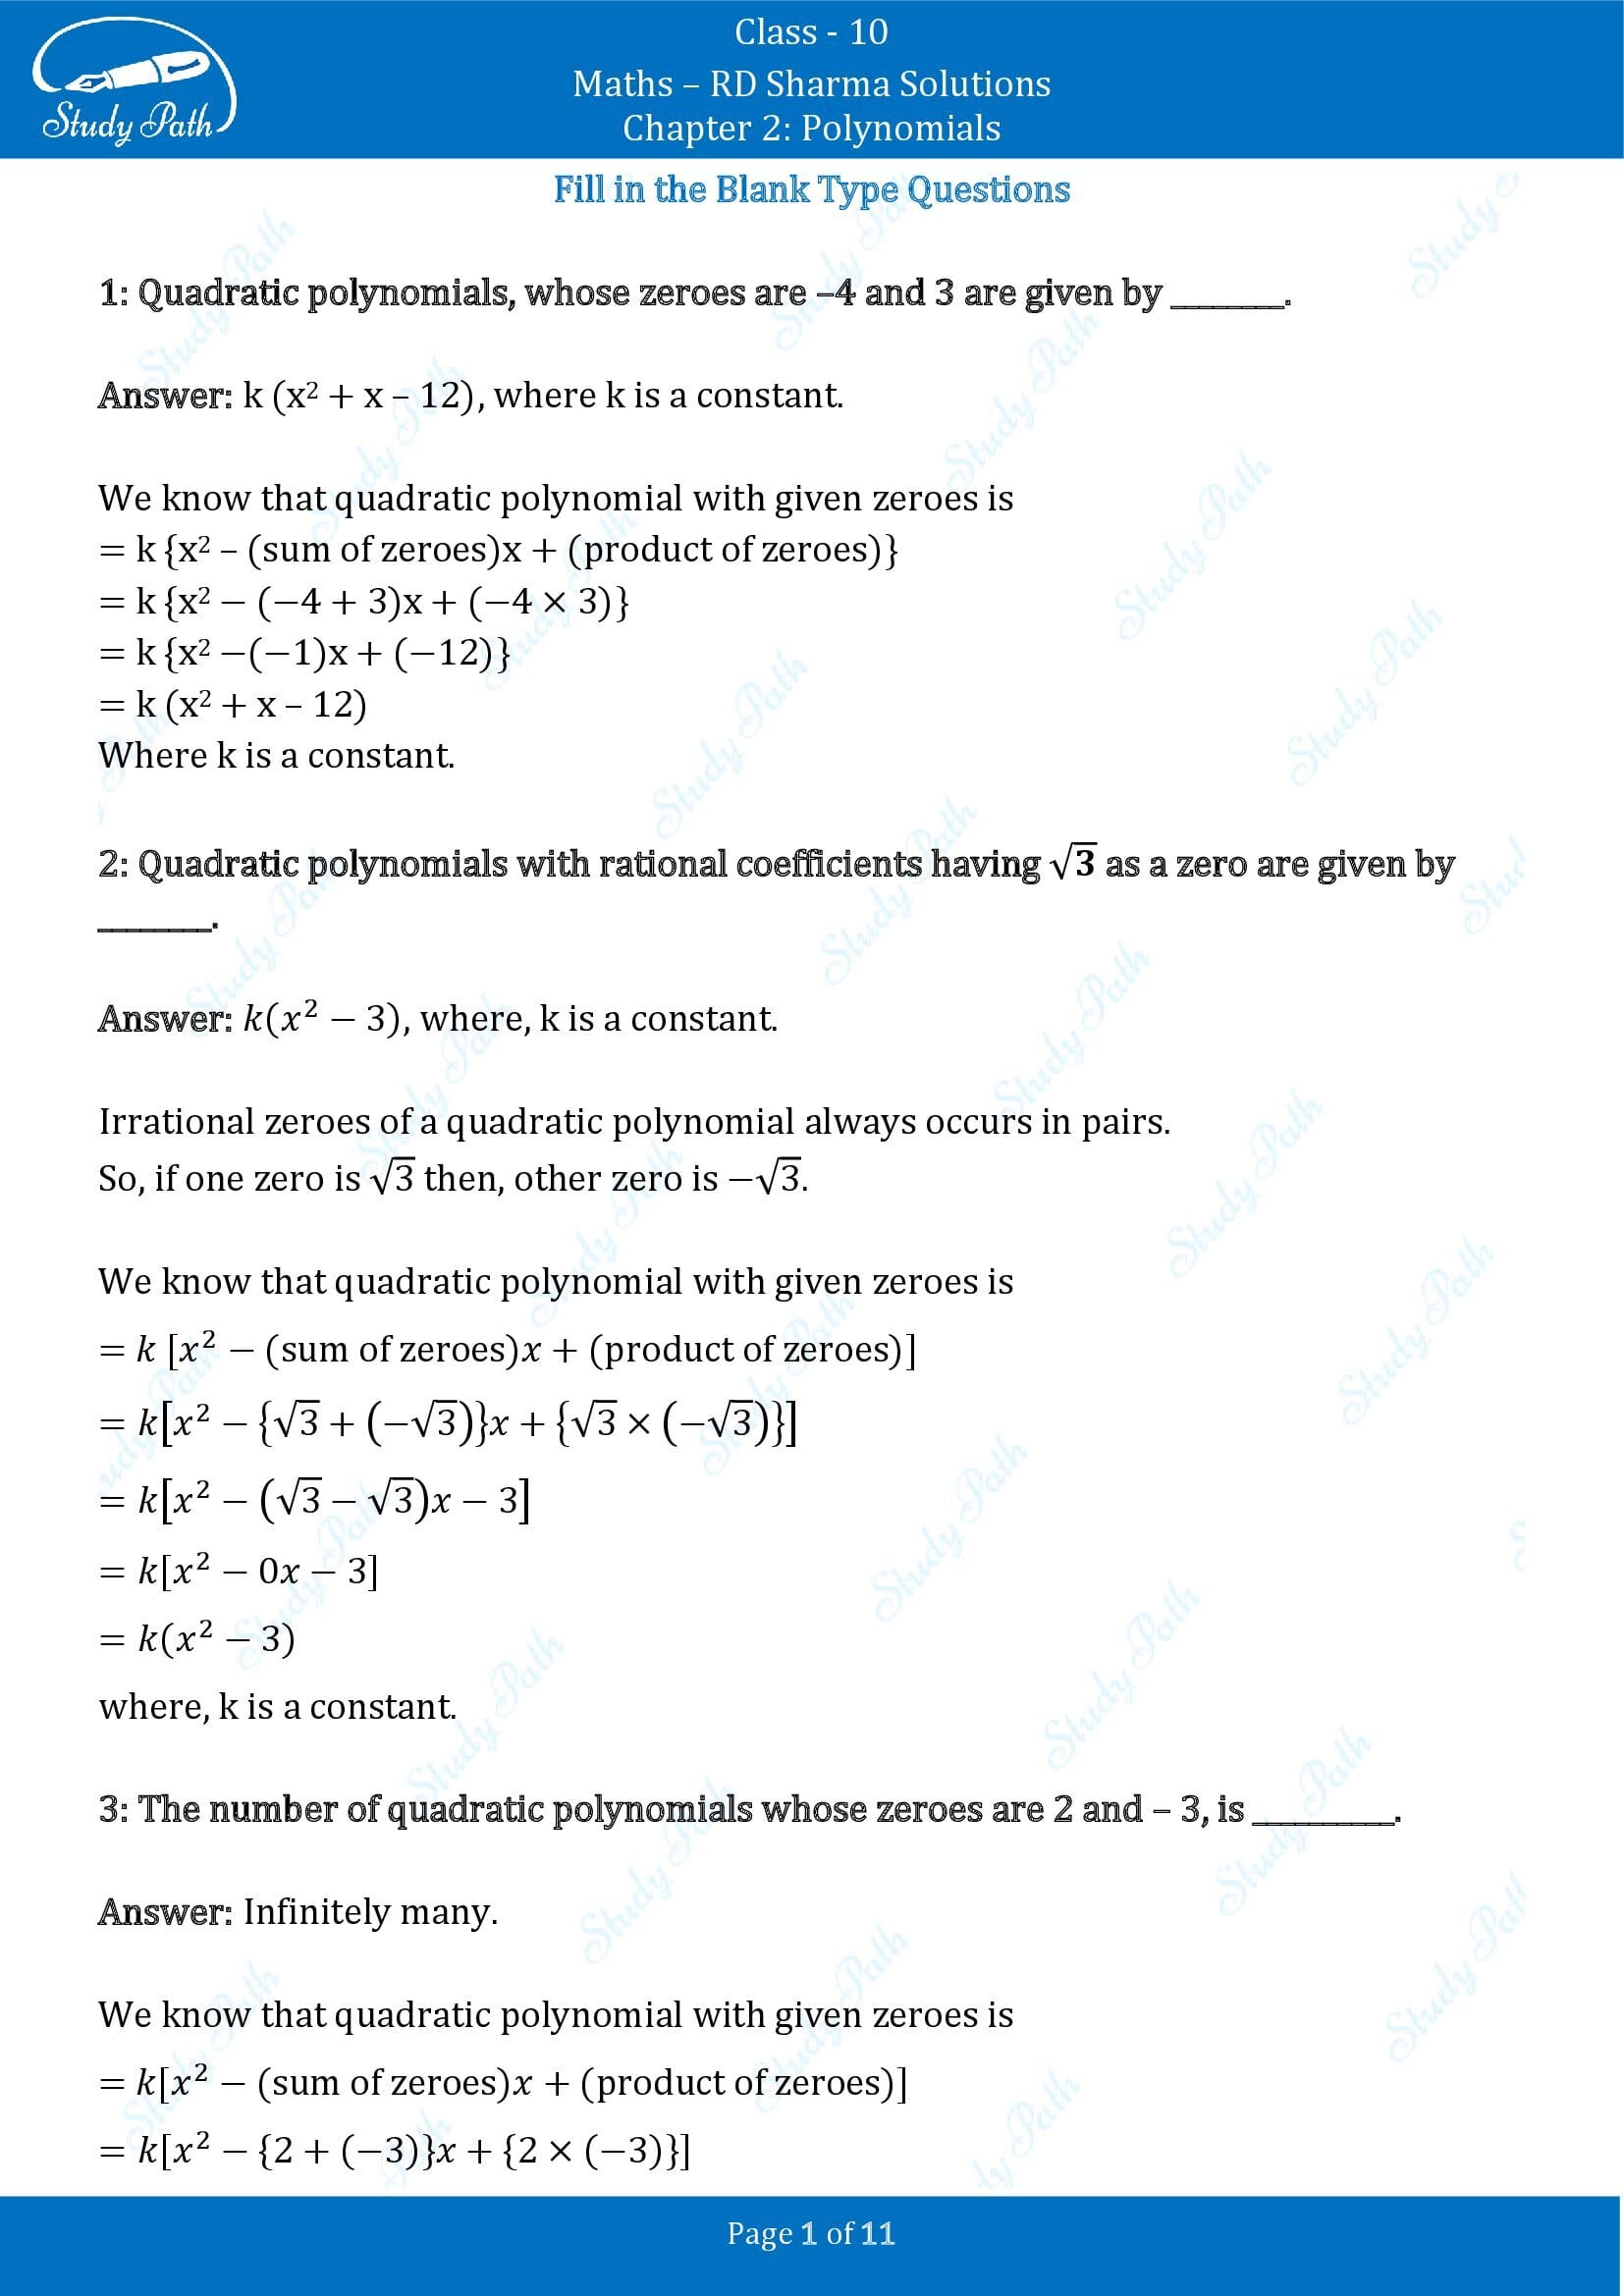 RD Sharma Solutions Class 10 Chapter 2 Polynomials Fill in the Blank Type Questions FBQs 00001